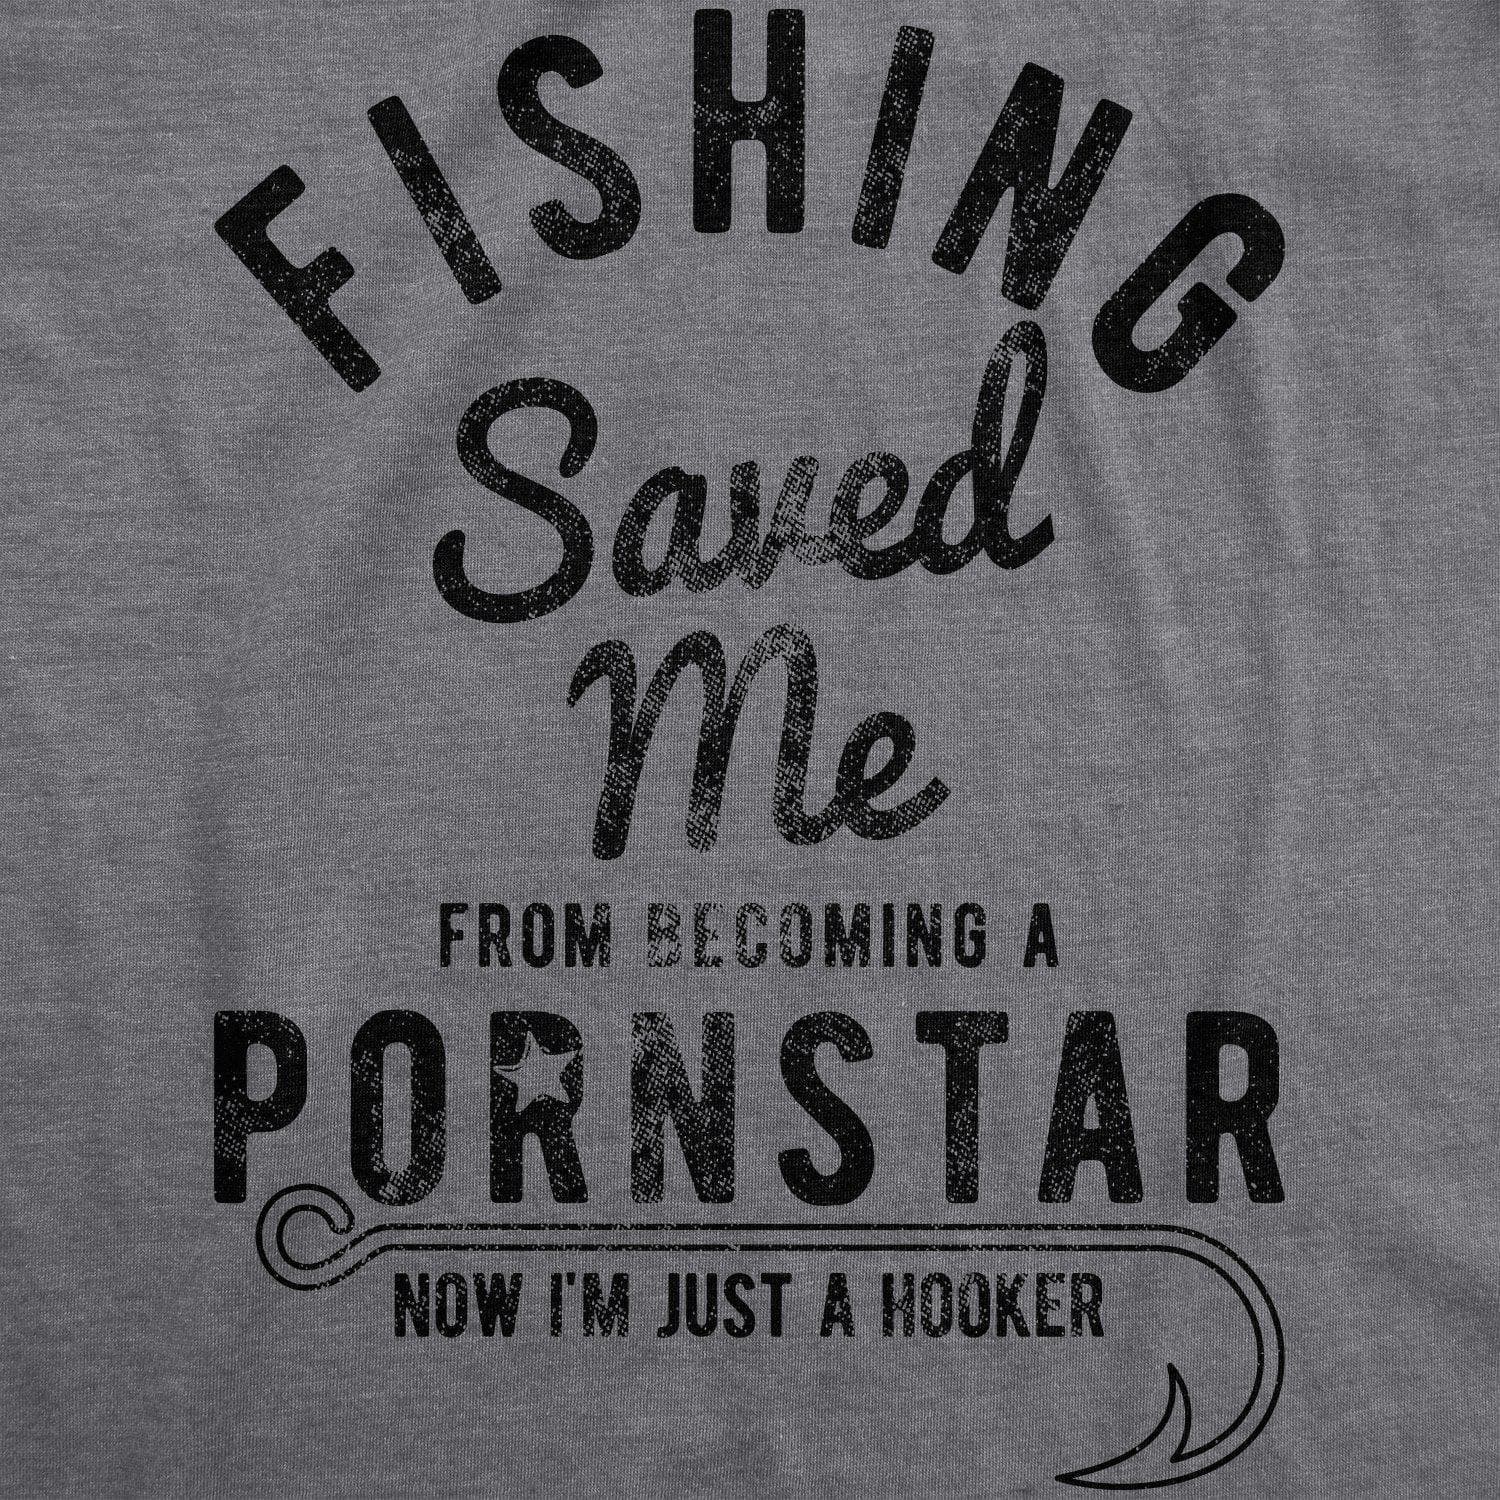 Fishing Saved Me From Becoming A Pornstar Women's Tshirt  -  Crazy Dog T-Shirts